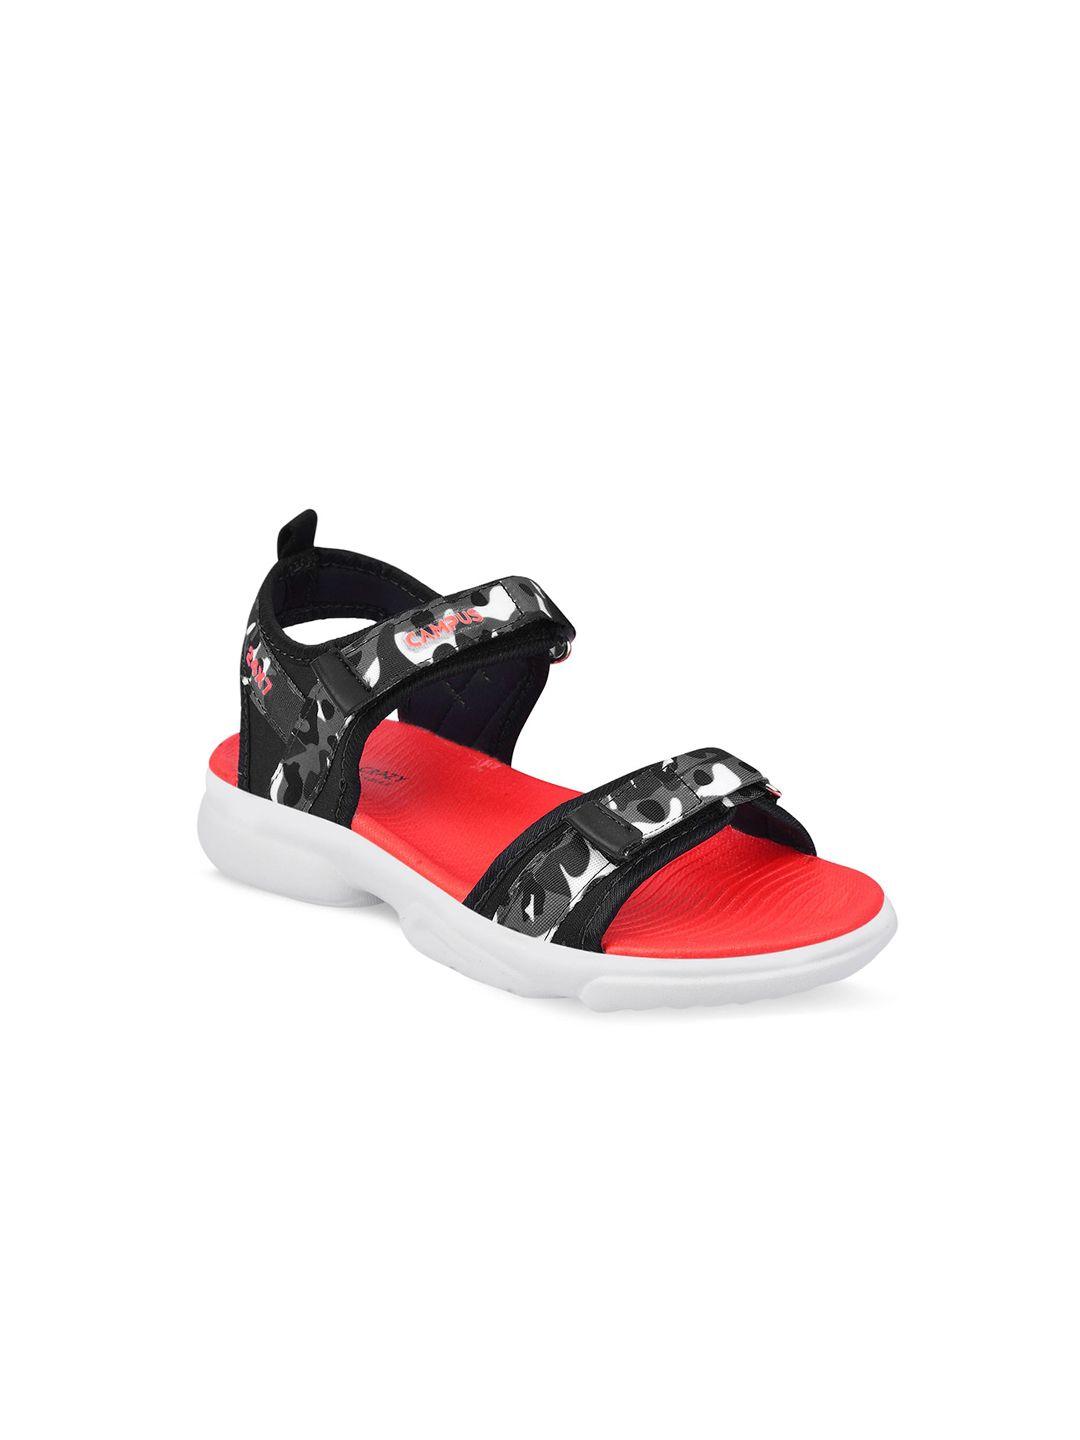 campus kids black & red solid sports sandals